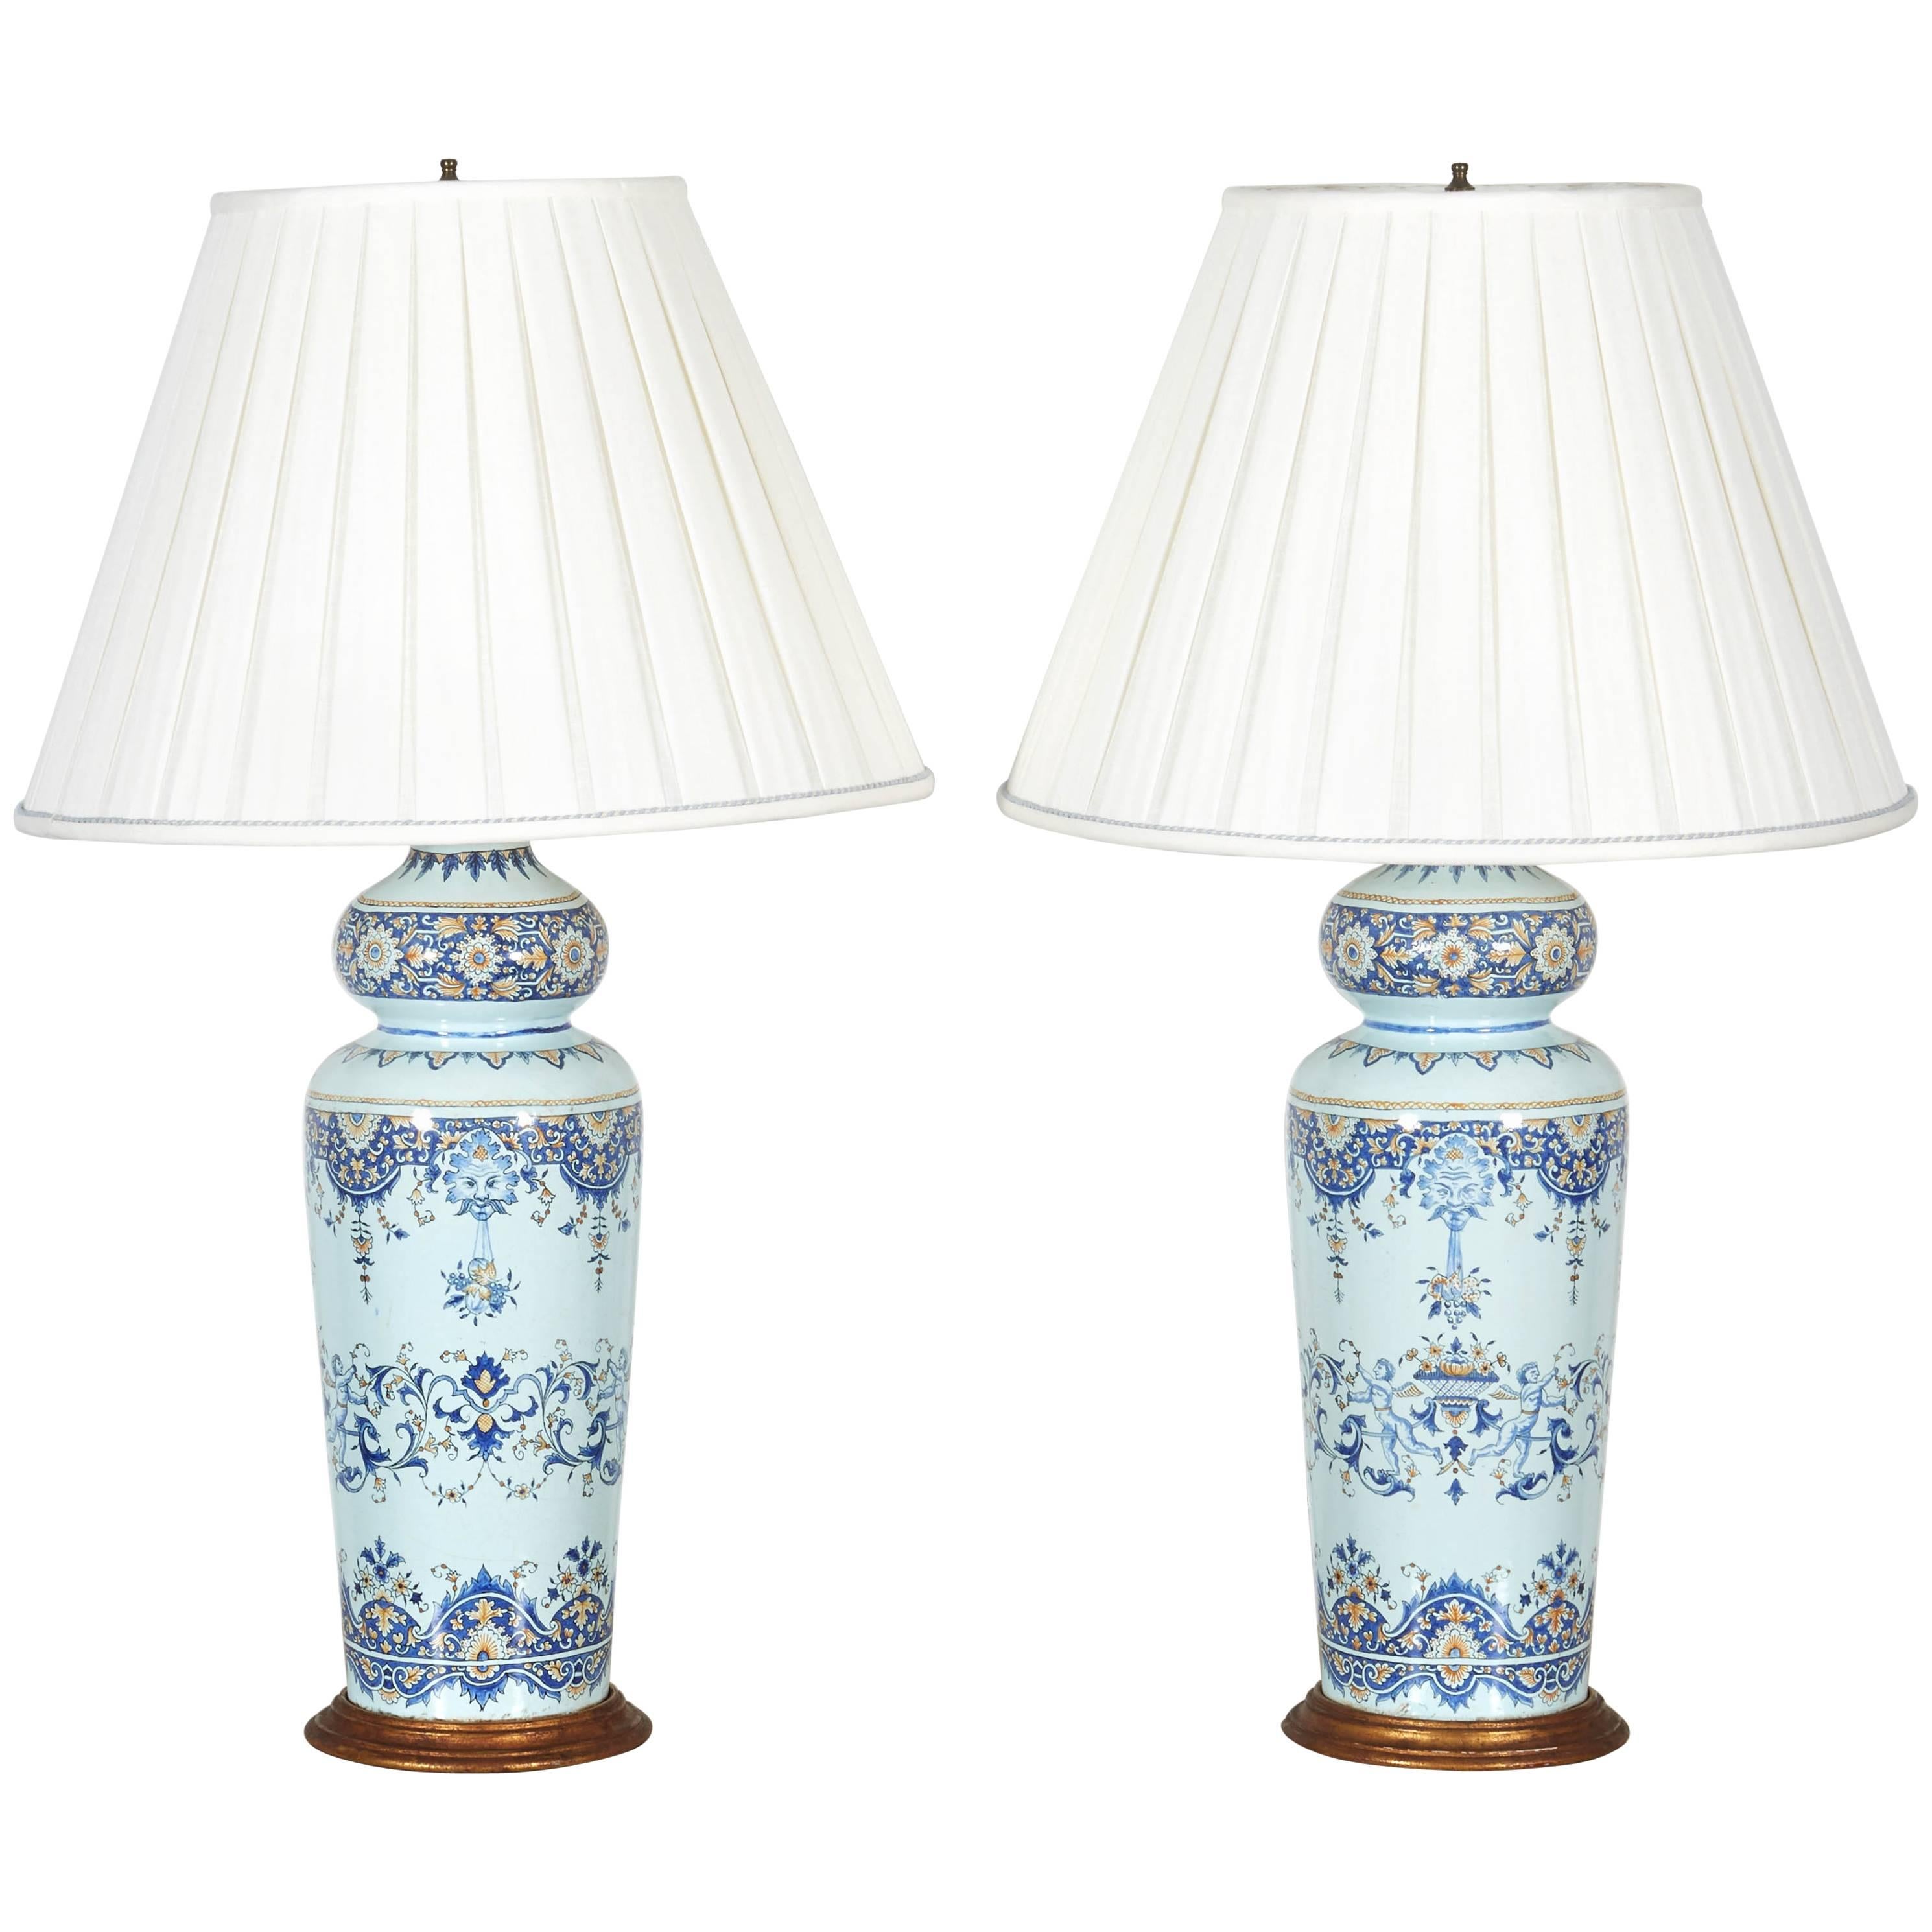 Tall Pair of 19th Century French Faience Vases Mounted as Lamps